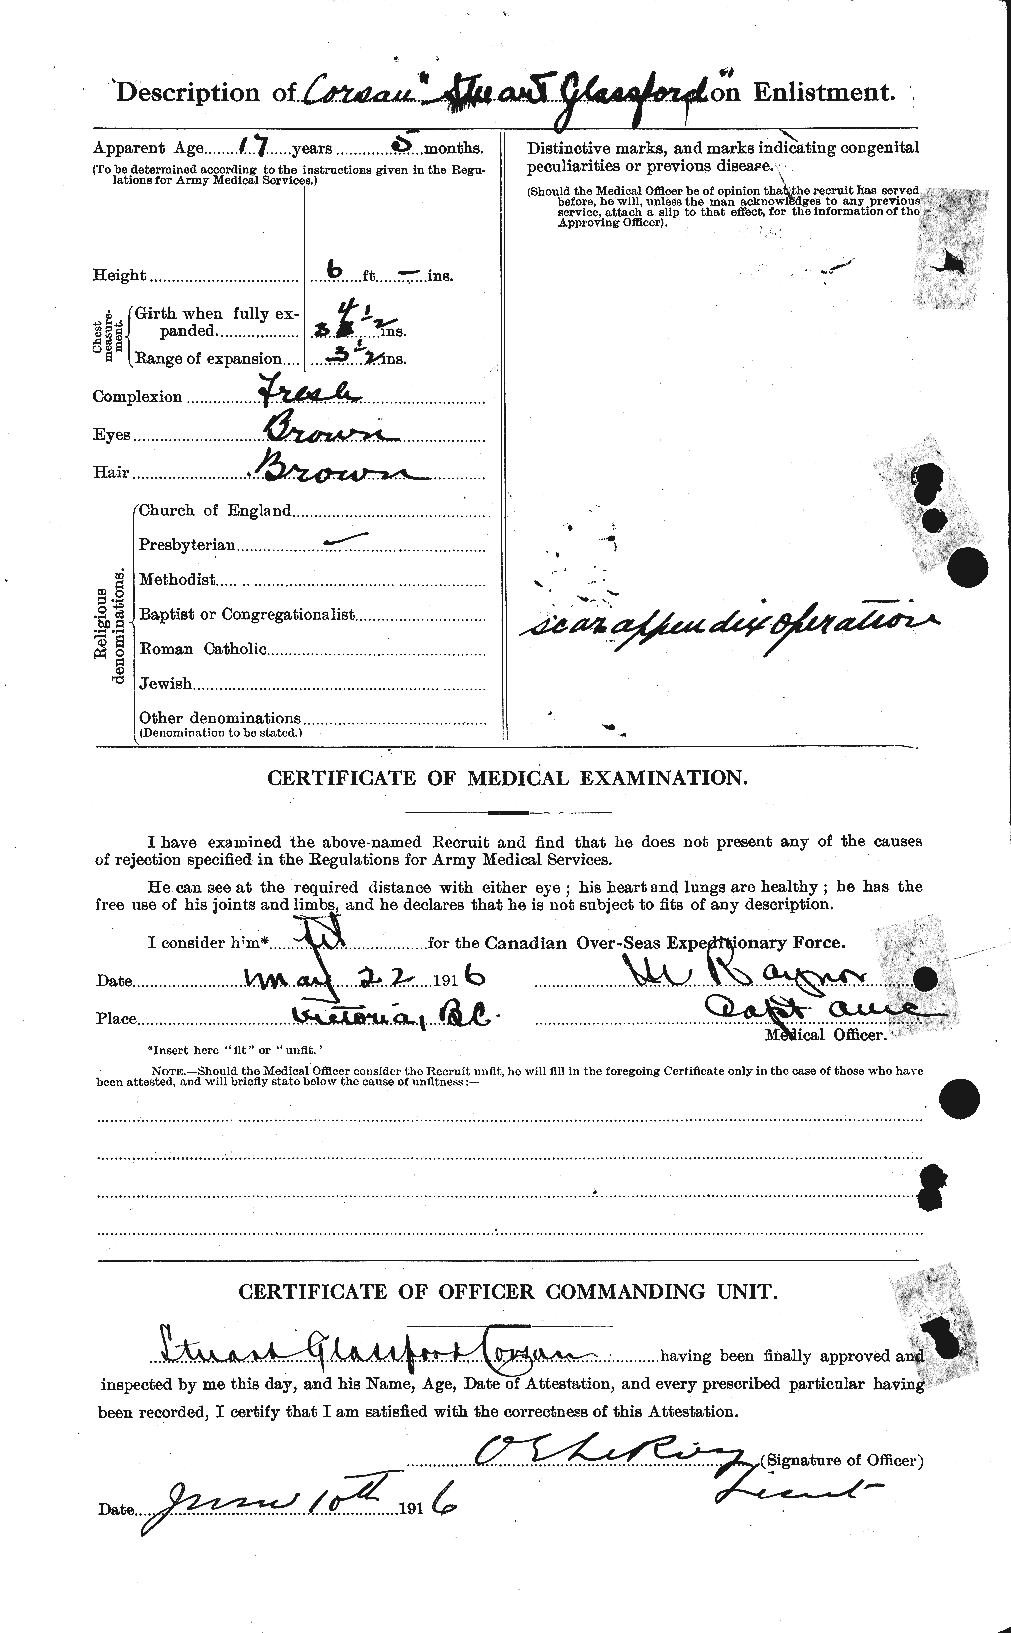 Personnel Records of the First World War - CEF 054202b